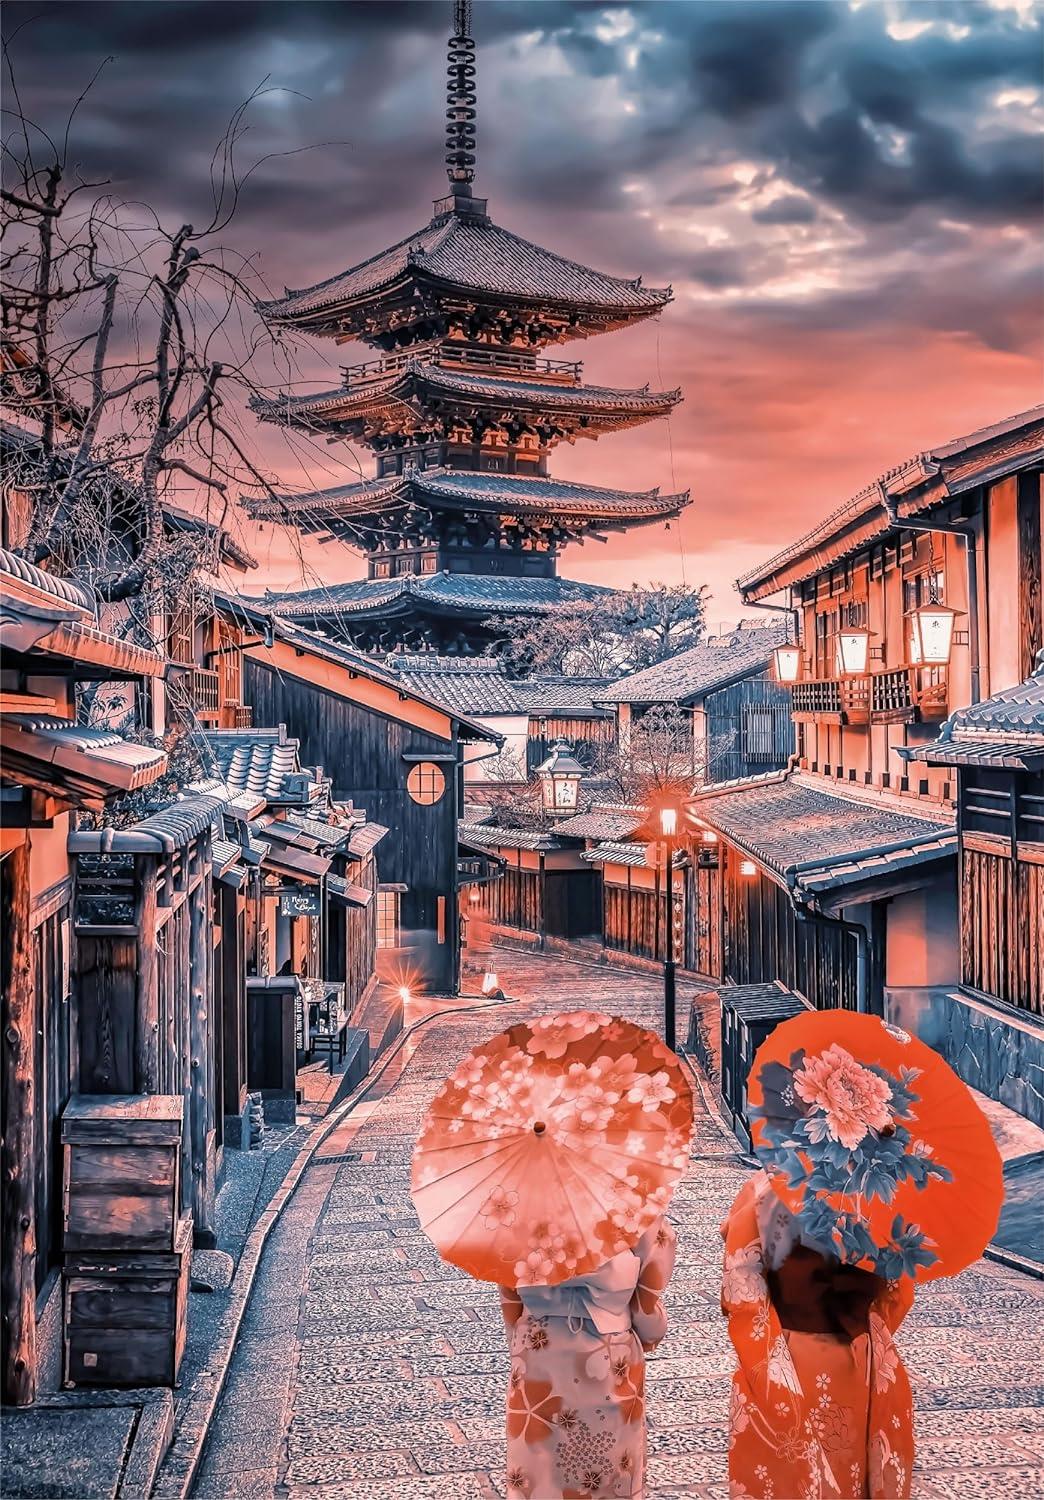 Clementoni Evening In Kyoto Jigsaw Puzzle (500 Pieces)